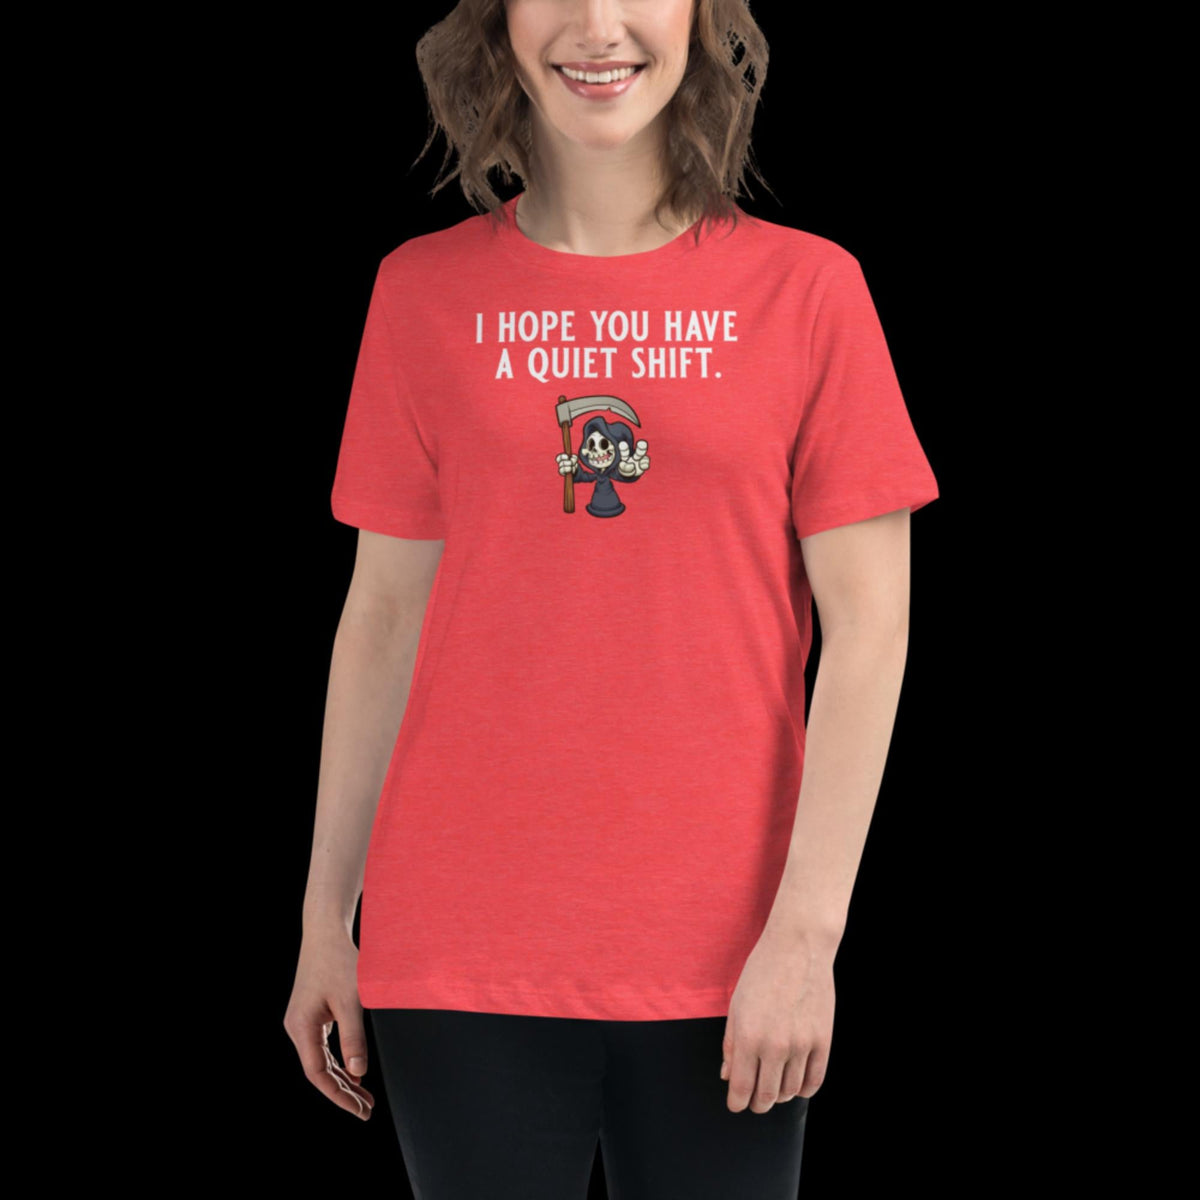 I hope you have a quiet shift Women's Relaxed T-Shirt - Salty Medic Clothing Co.